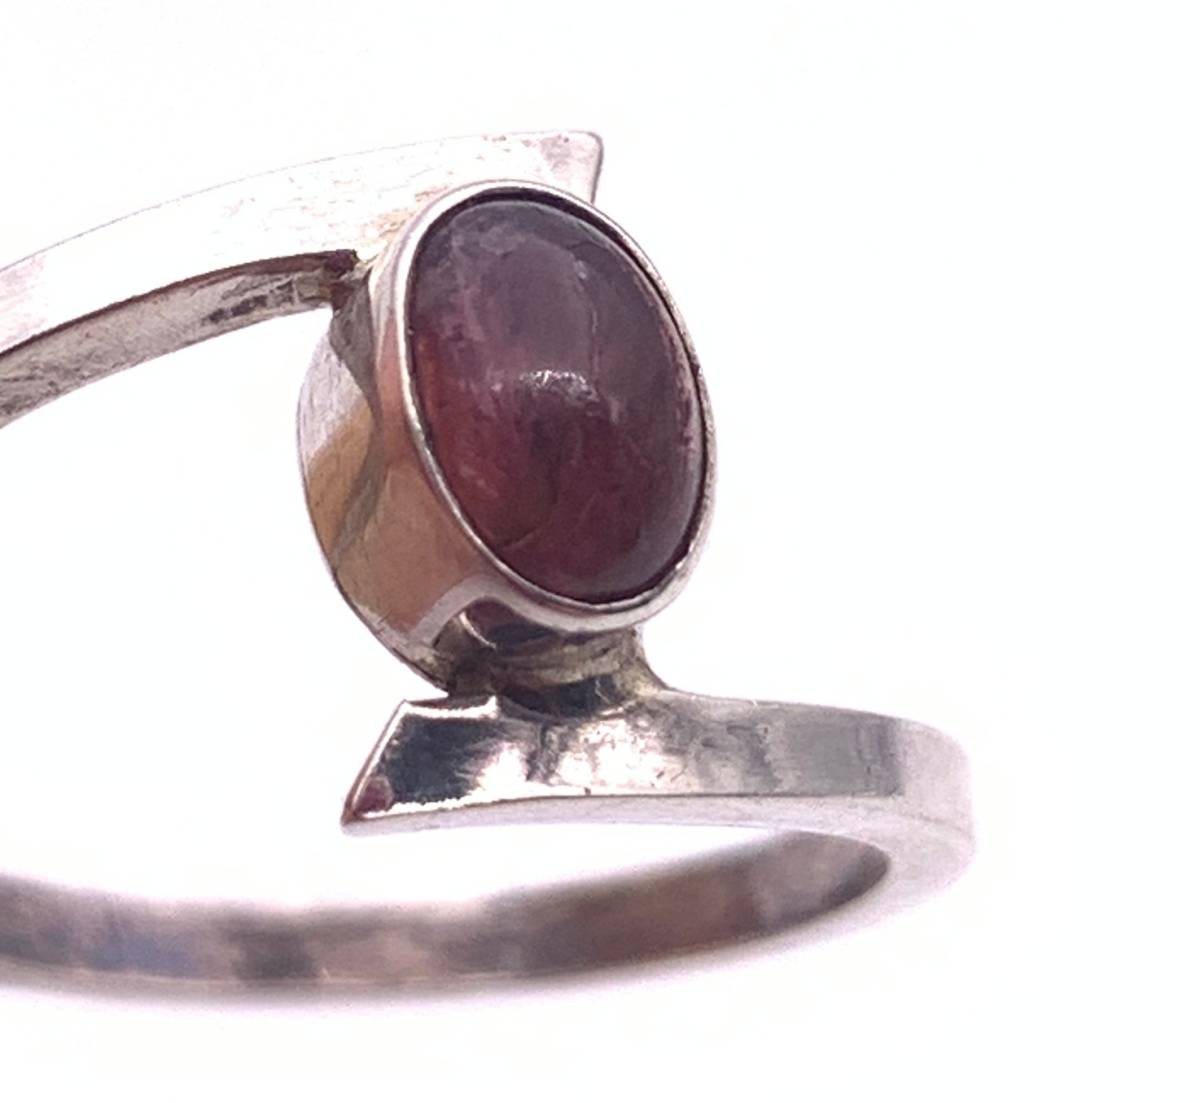  natural stone tourmaline ( electric stone )silver925 ring *13.5 number 